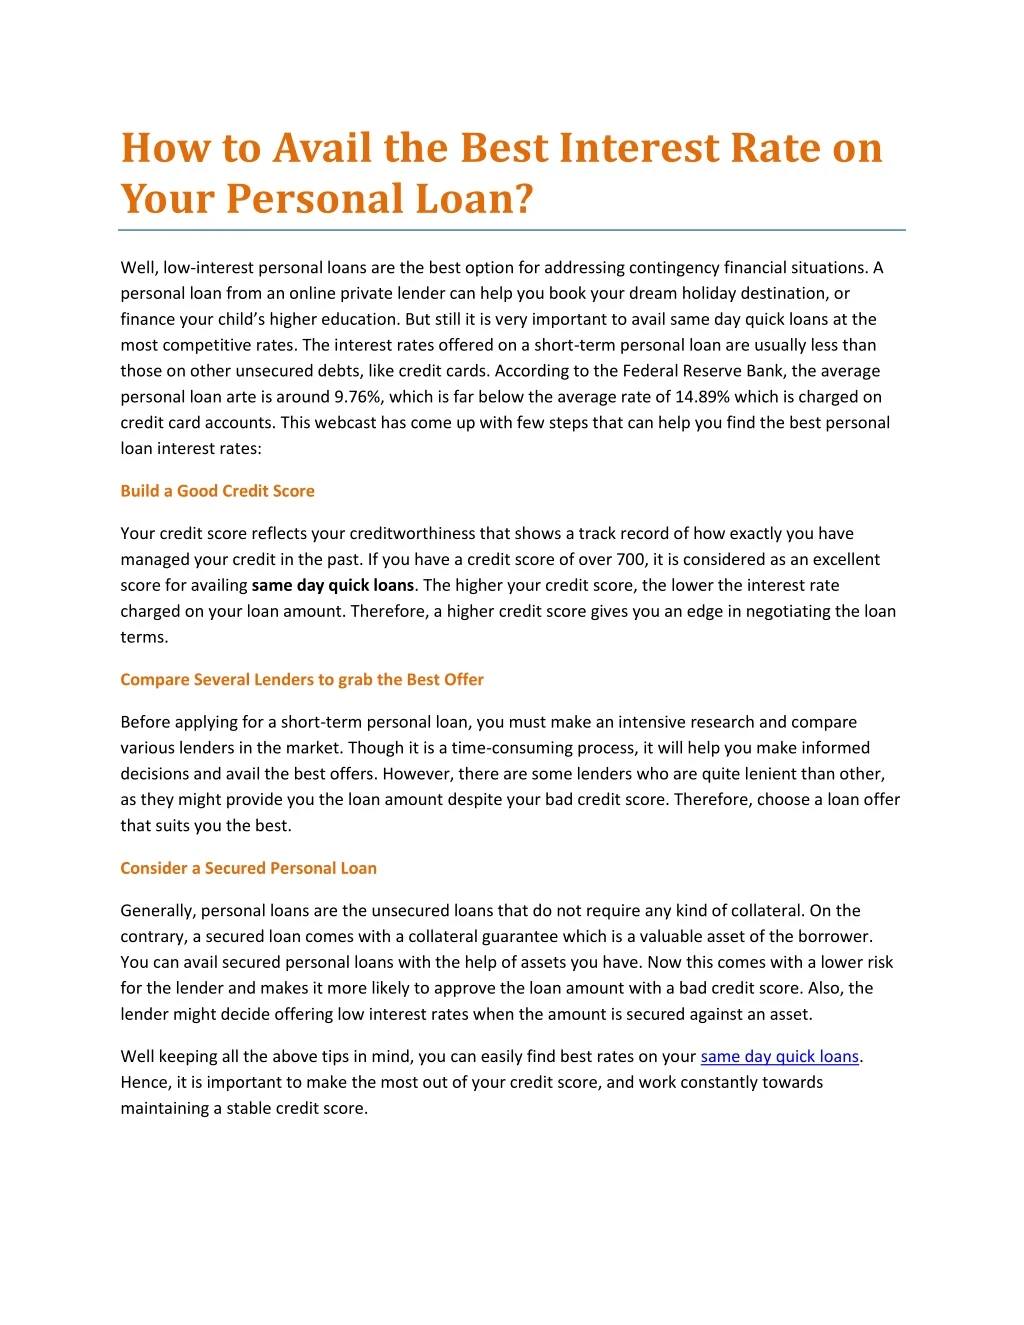 how to avail the best interest rate on your